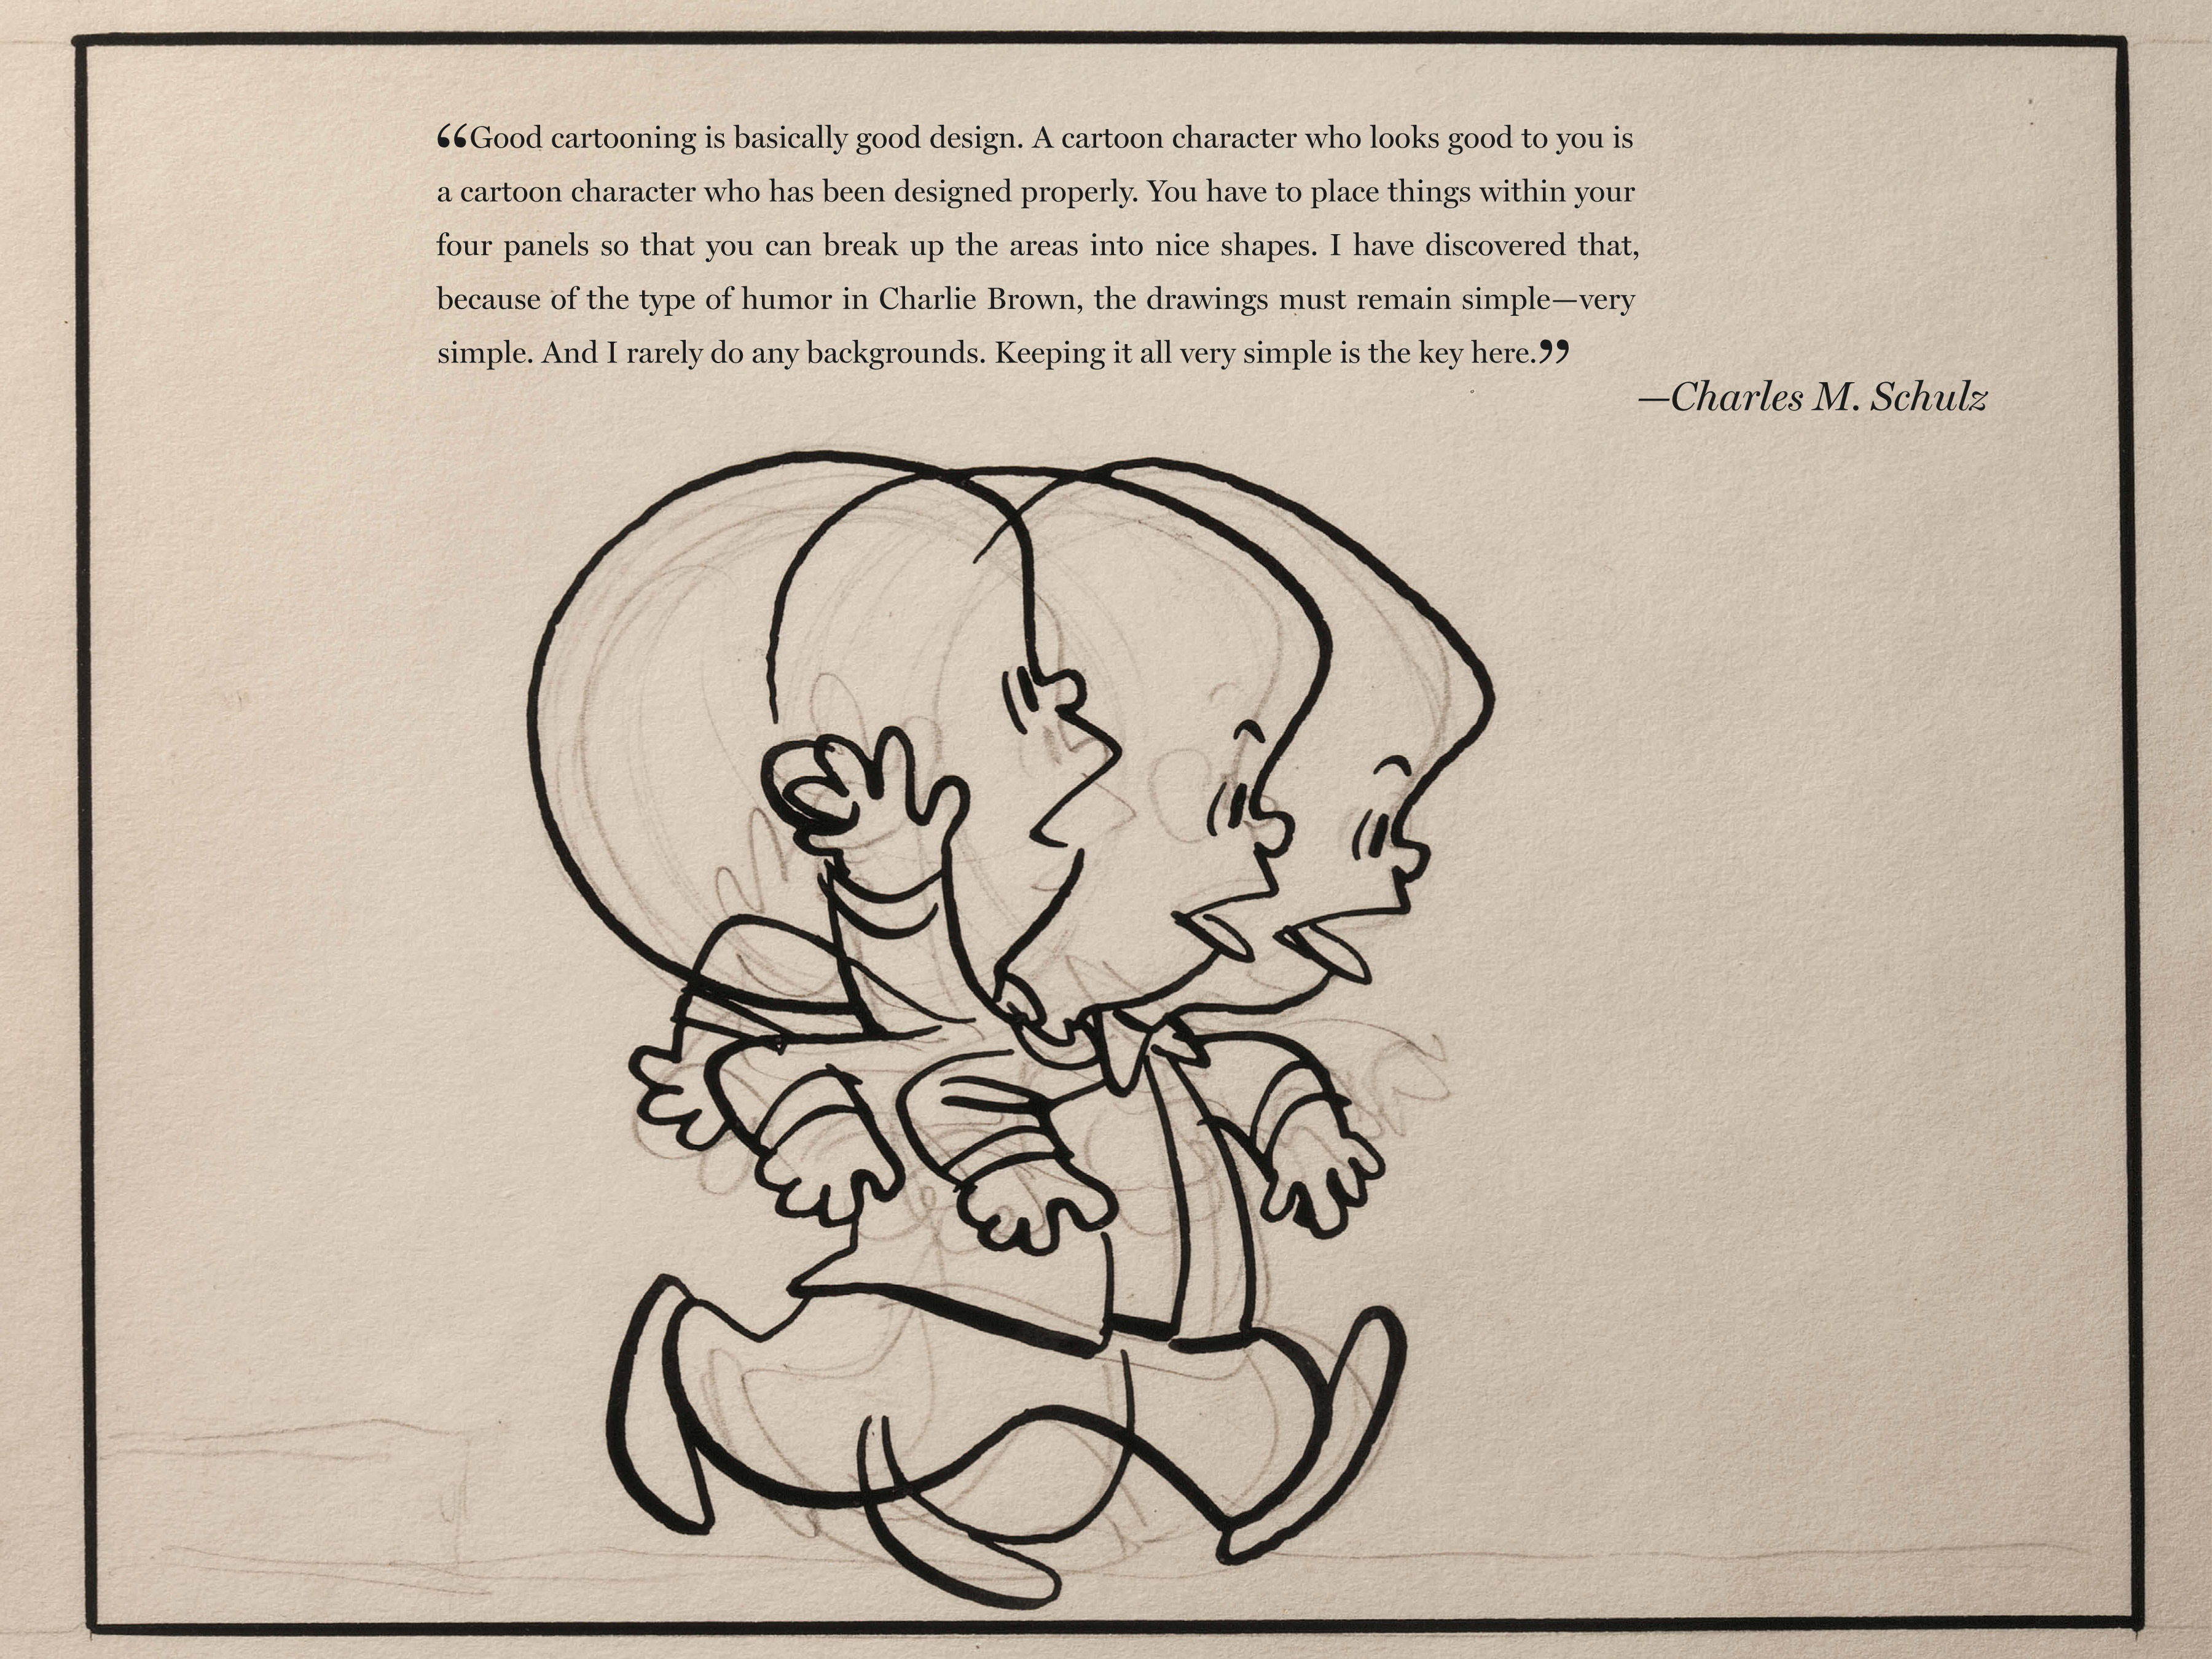 Read online Only What's Necessary: Charles M. Schulz and the Art of Peanuts comic -  Issue # TPB (Part 1) - 6